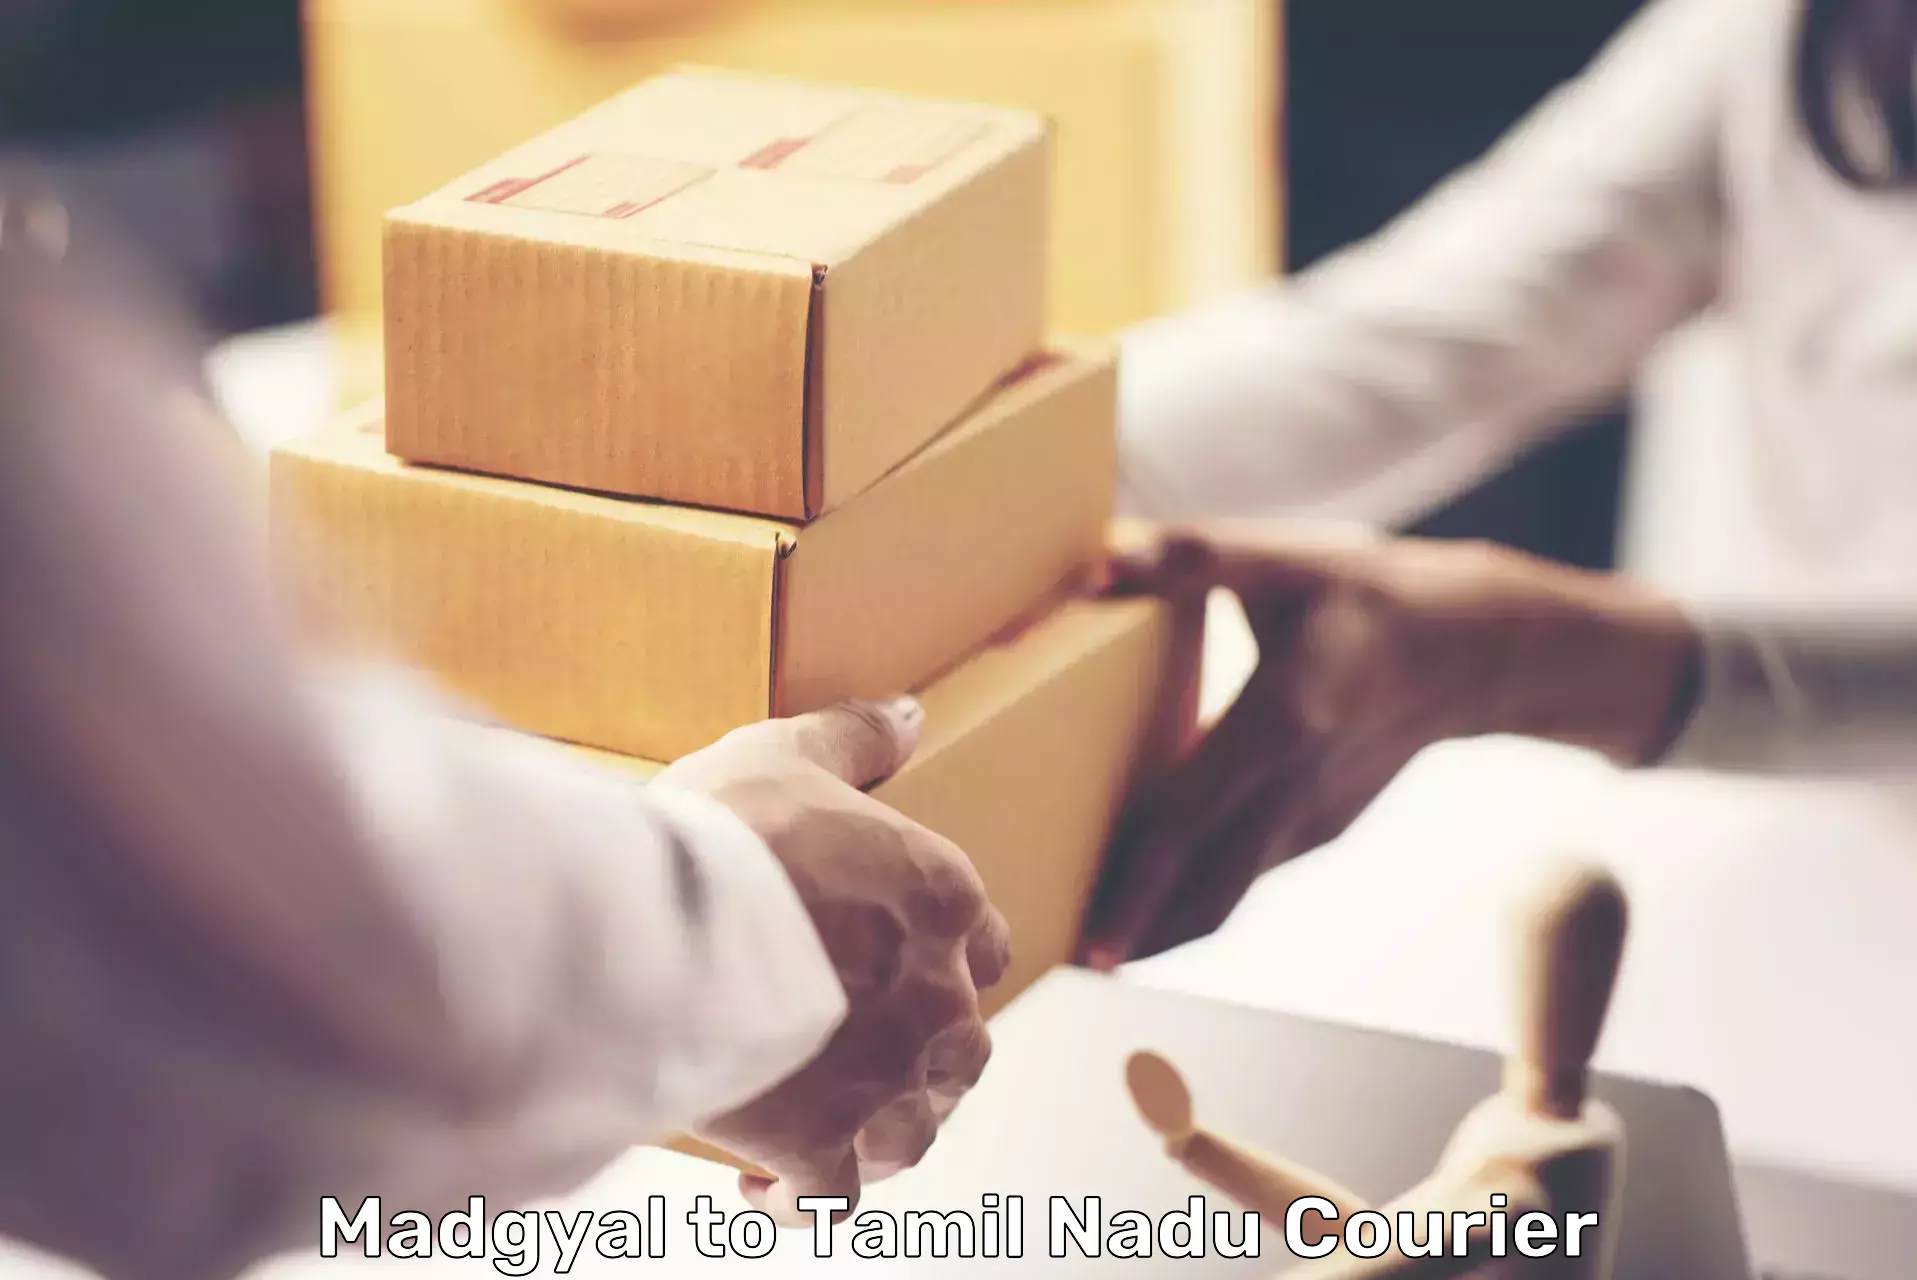 Same-day delivery solutions Madgyal to Tamil Nadu